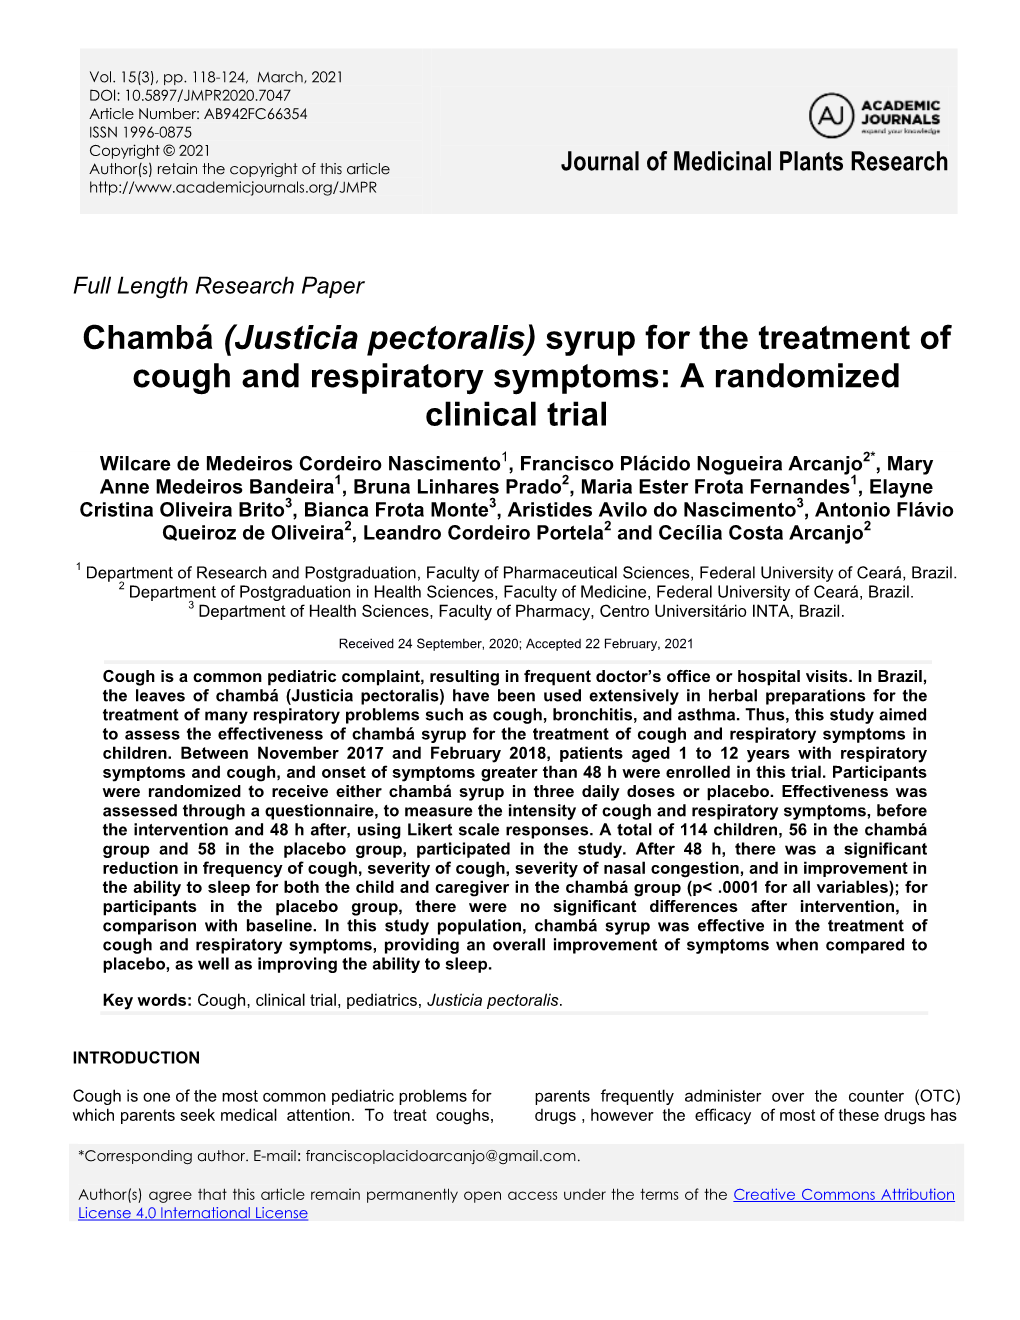 (Justicia Pectoralis) Syrup for the Treatment of Cough and Respiratory Symptoms: a Randomized Clinical Trial